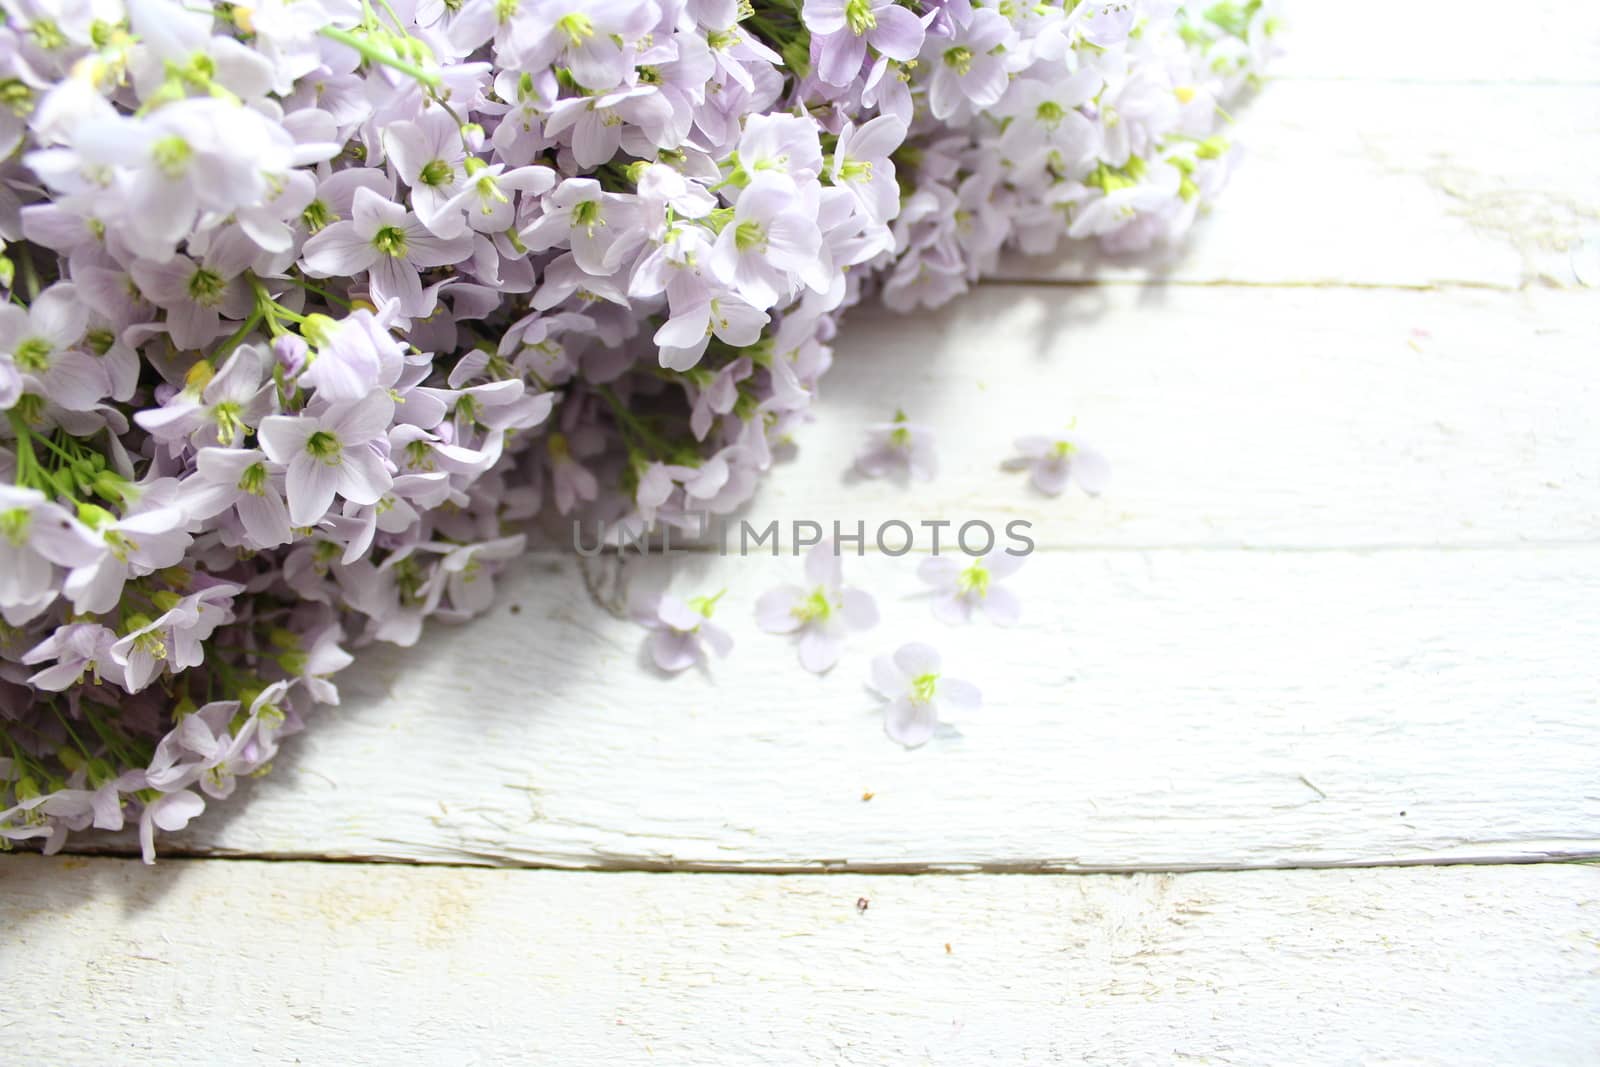 The picture shows a cuckoo flower on wooden boards.